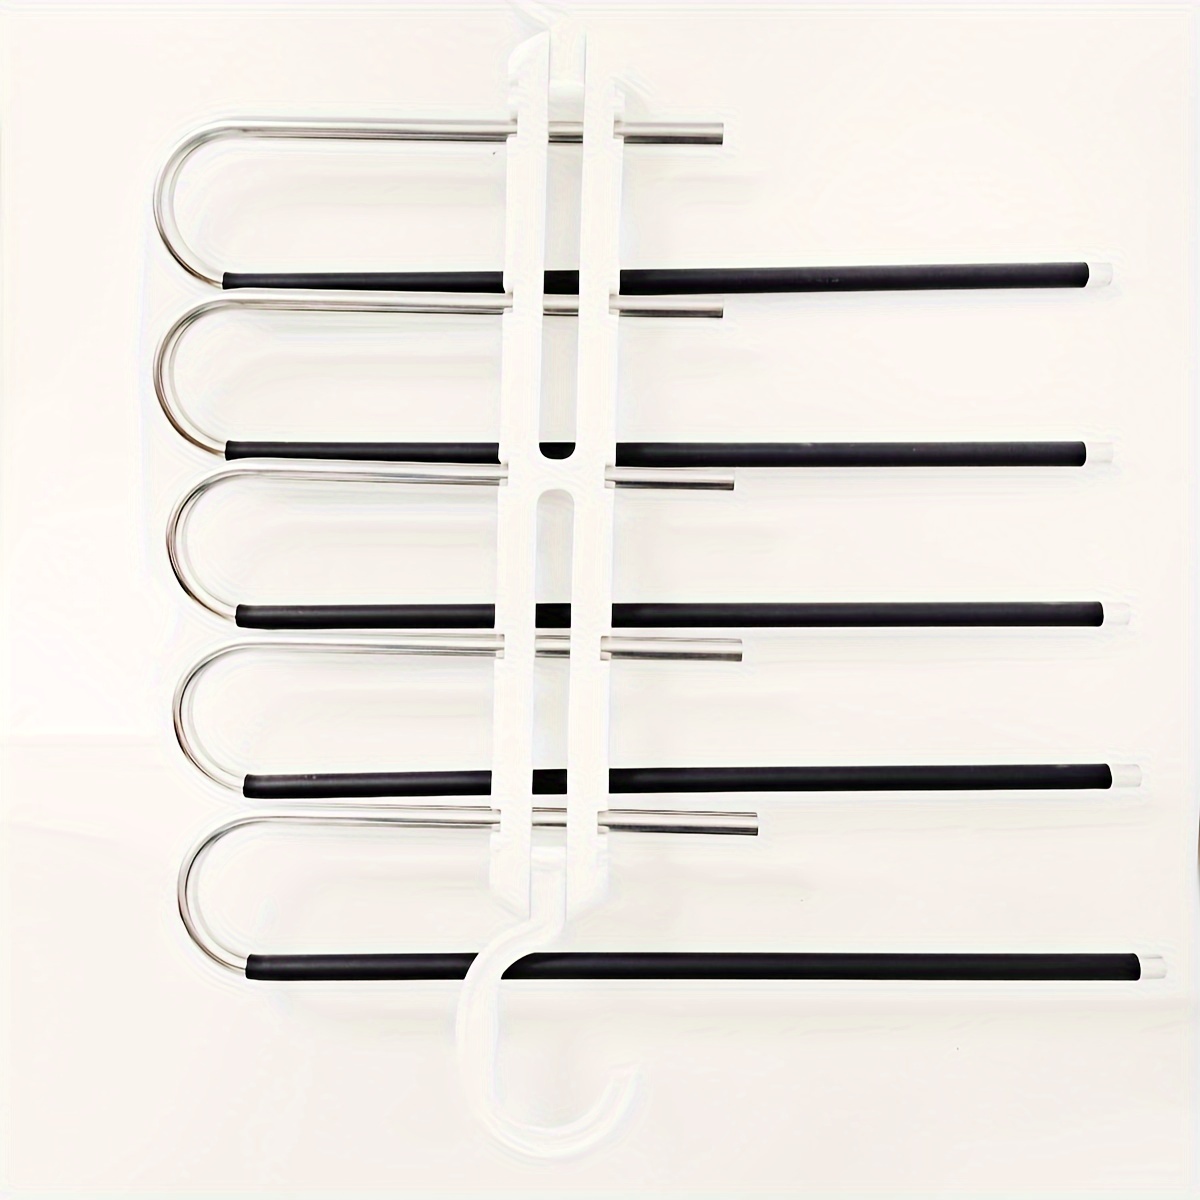 Stainless steel trousers rack S-shaped 5-layer wardrobe hanger trouser clip  clothing storage magic hanger Tie towel hanger - AliExpress